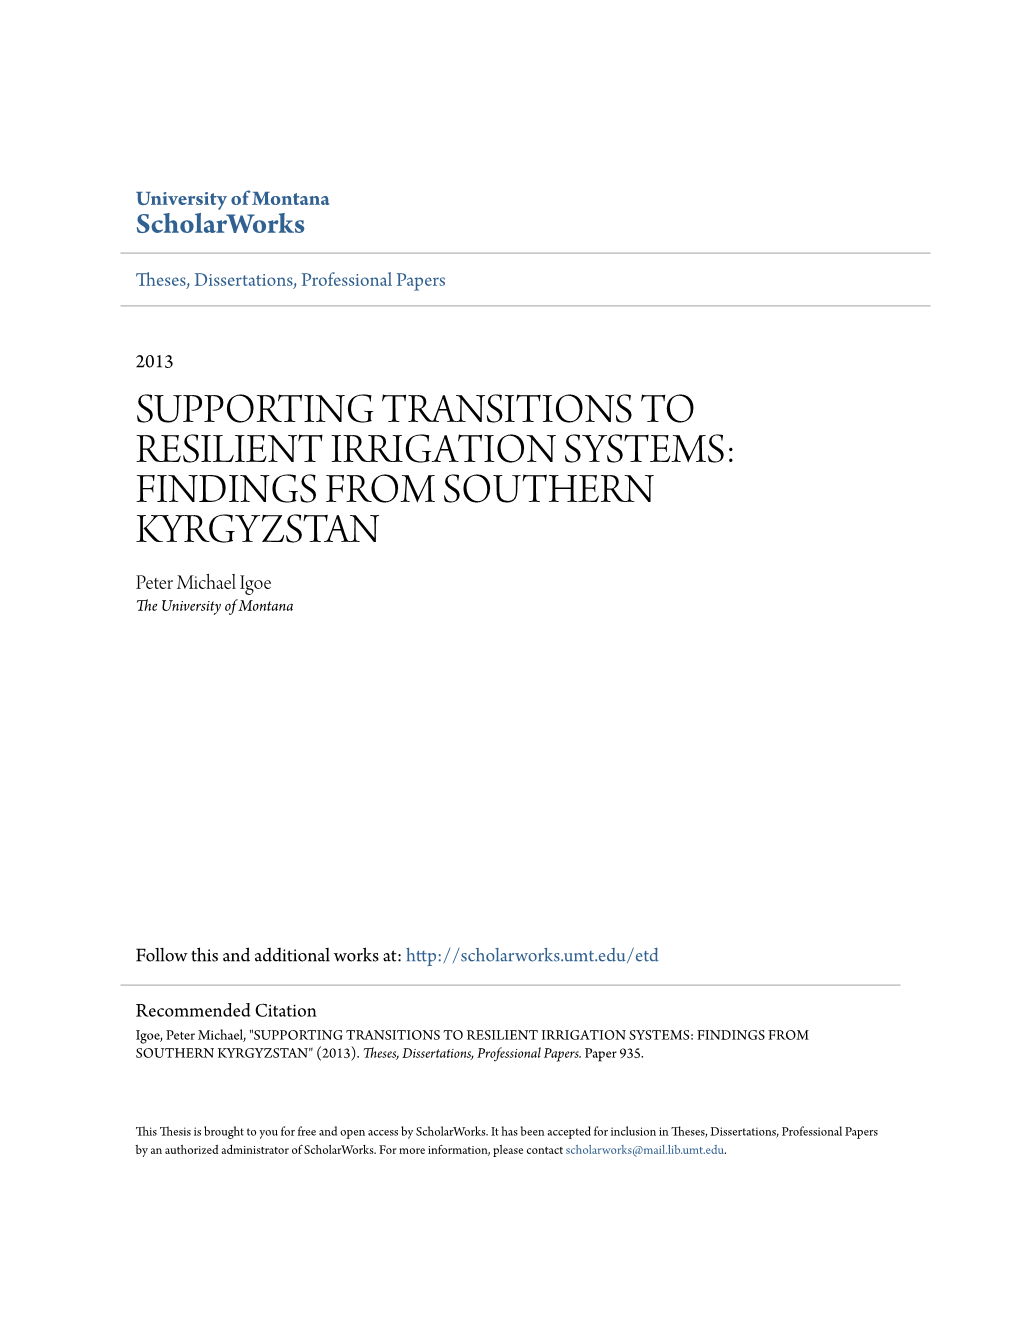 SUPPORTING TRANSITIONS to RESILIENT IRRIGATION SYSTEMS: FINDINGS from SOUTHERN KYRGYZSTAN Peter Michael Igoe the University of Montana